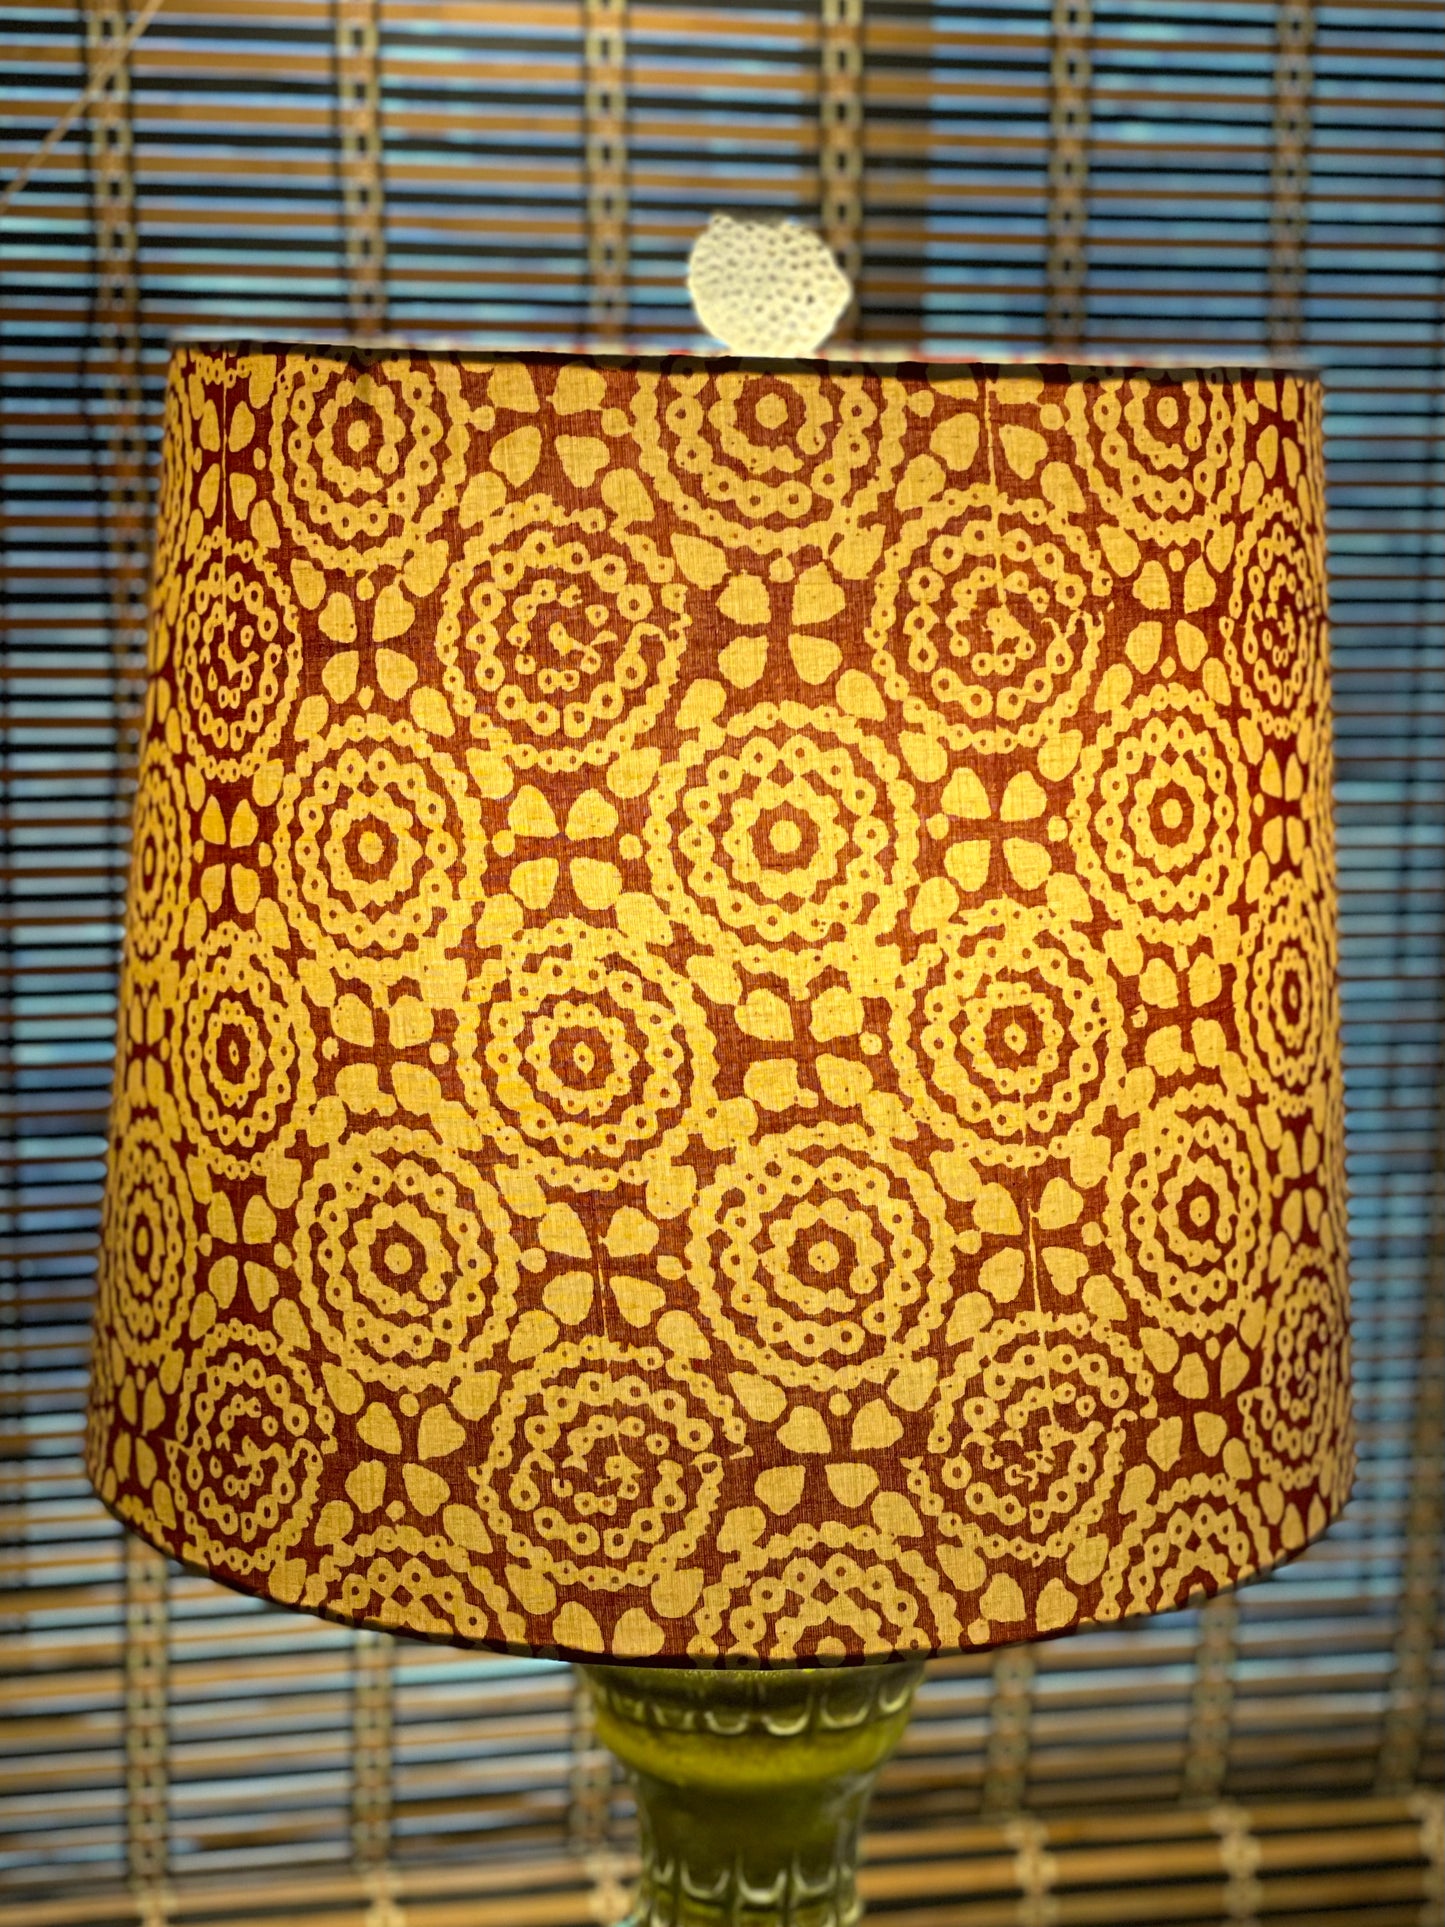 Large Empire Shade. 11.75 x 13.75 x 11.75. Hand Block Print from Jaipur. Madder Dyed Medallion Motif.